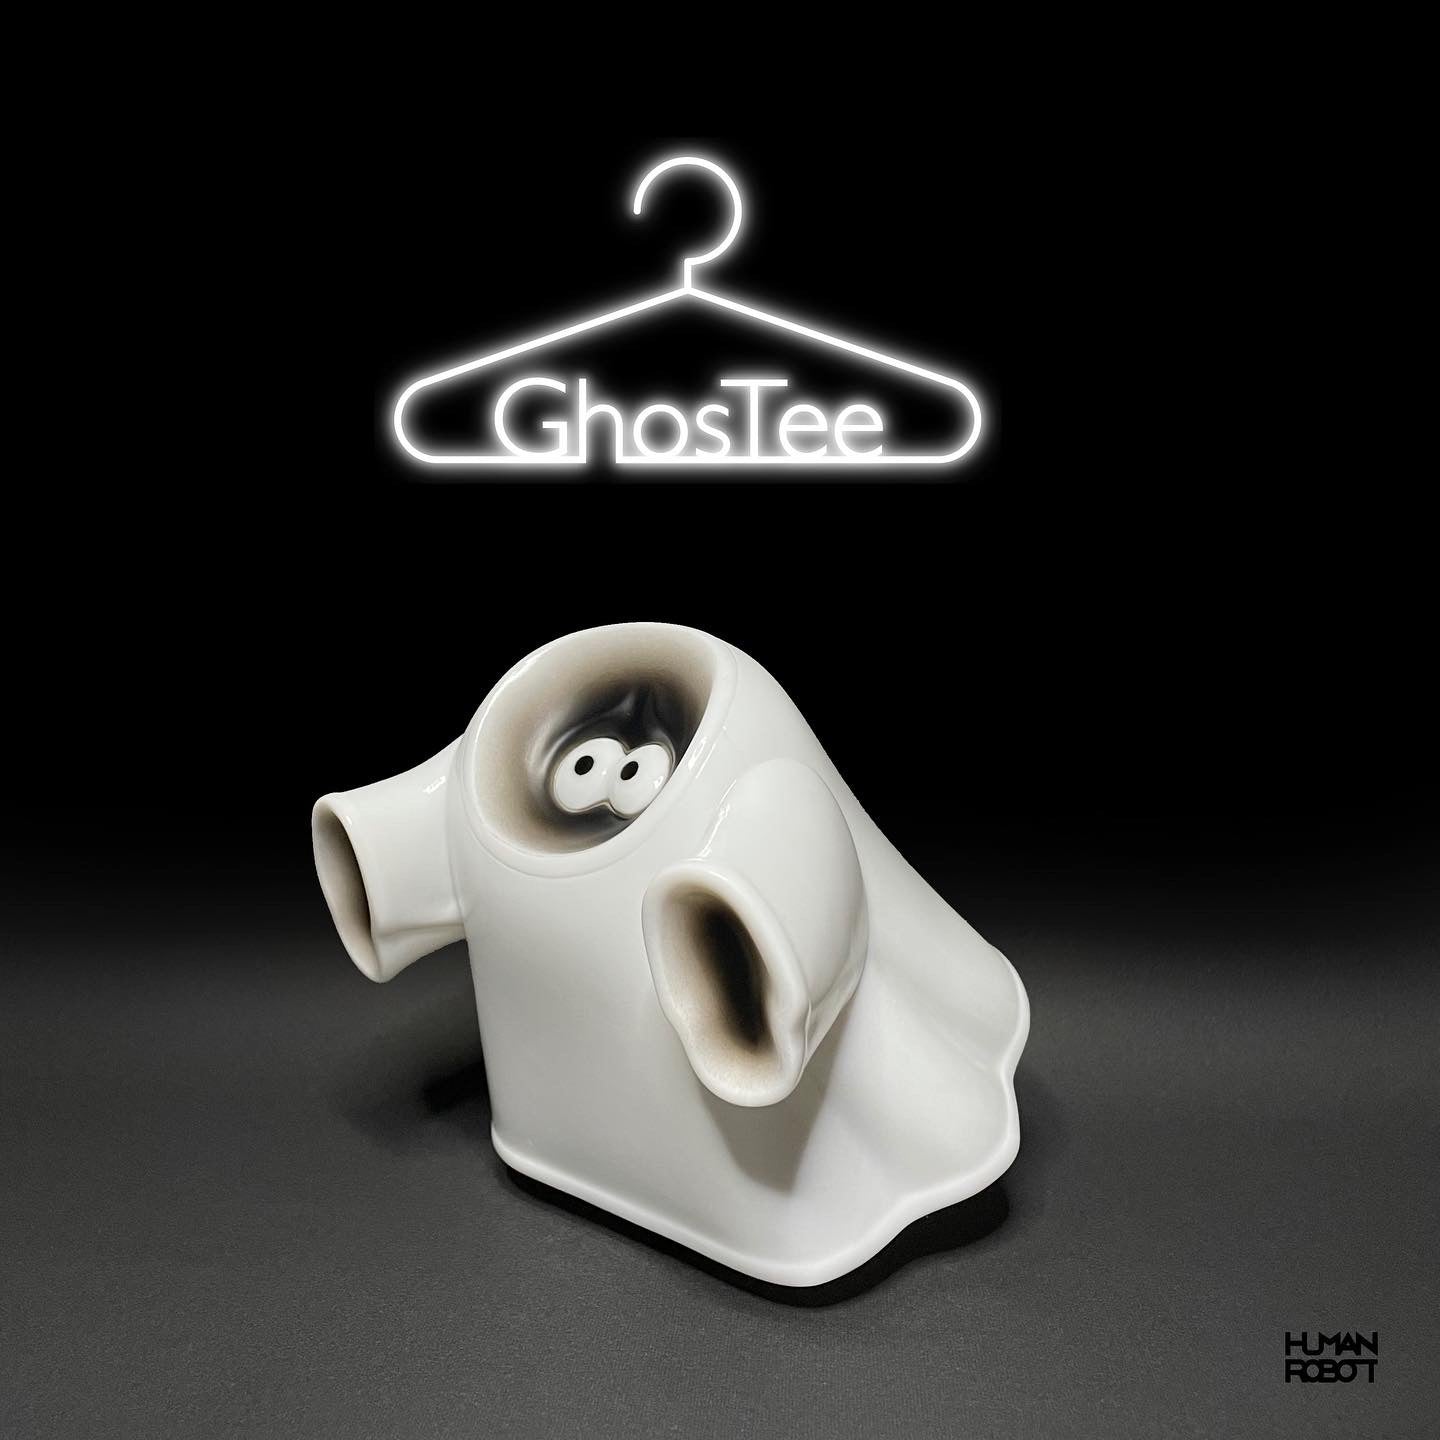 GhosTee by Human Robot